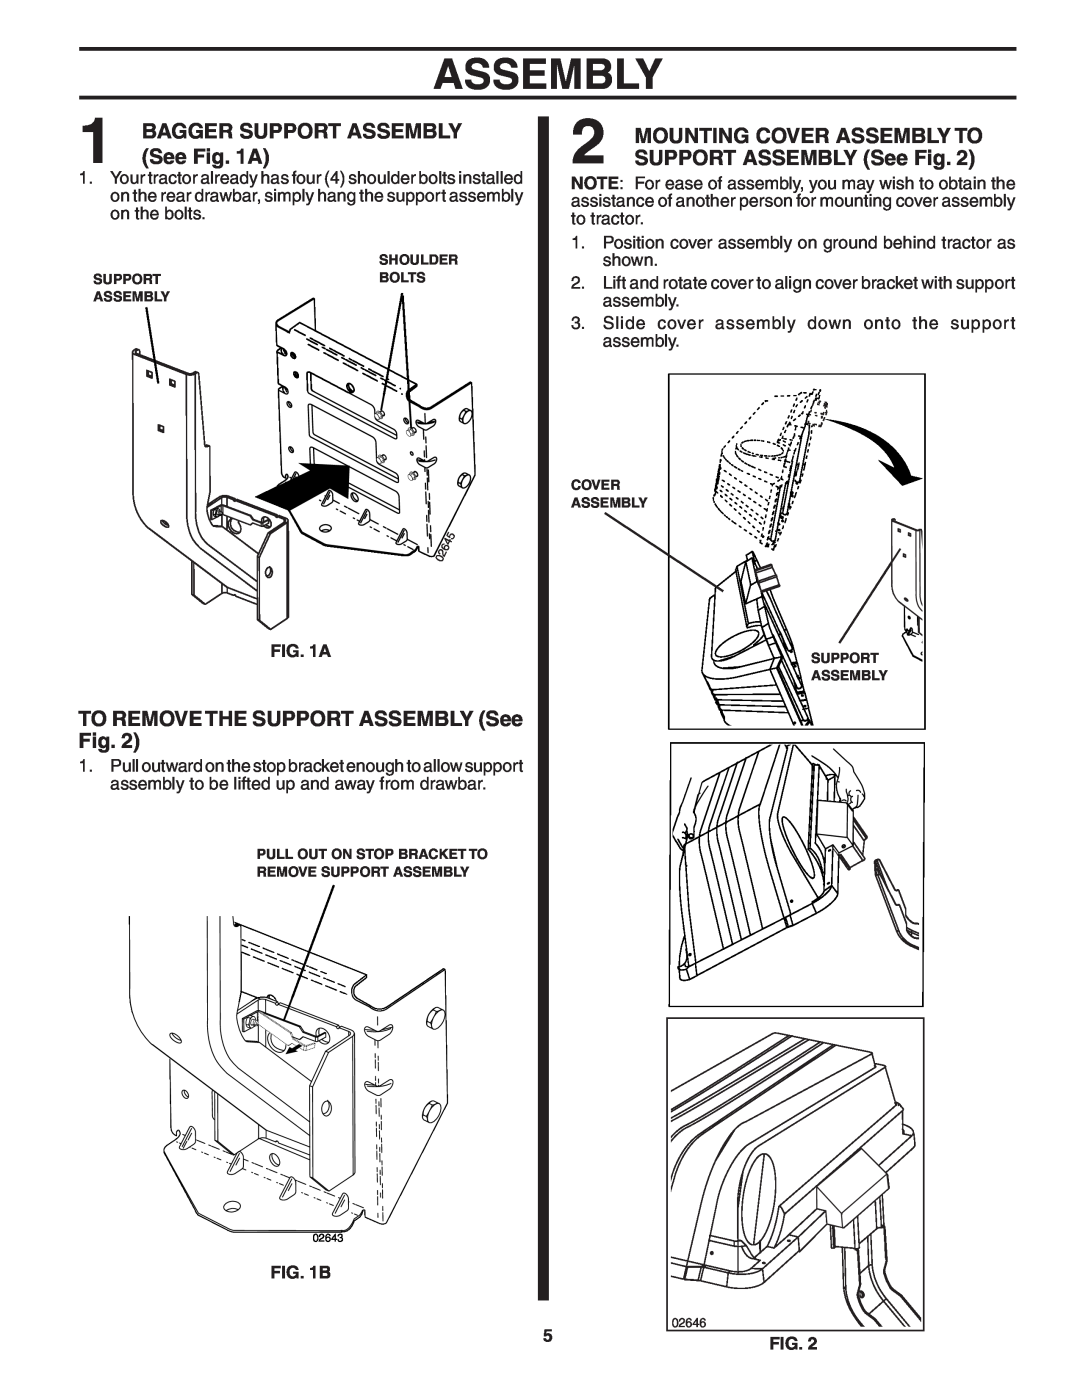 Poulan 194915 See A, TO REMOVE THE SUPPORT ASSEMBLY See Fig, Bagger Support Assembly, Mounting Cover Assembly To 